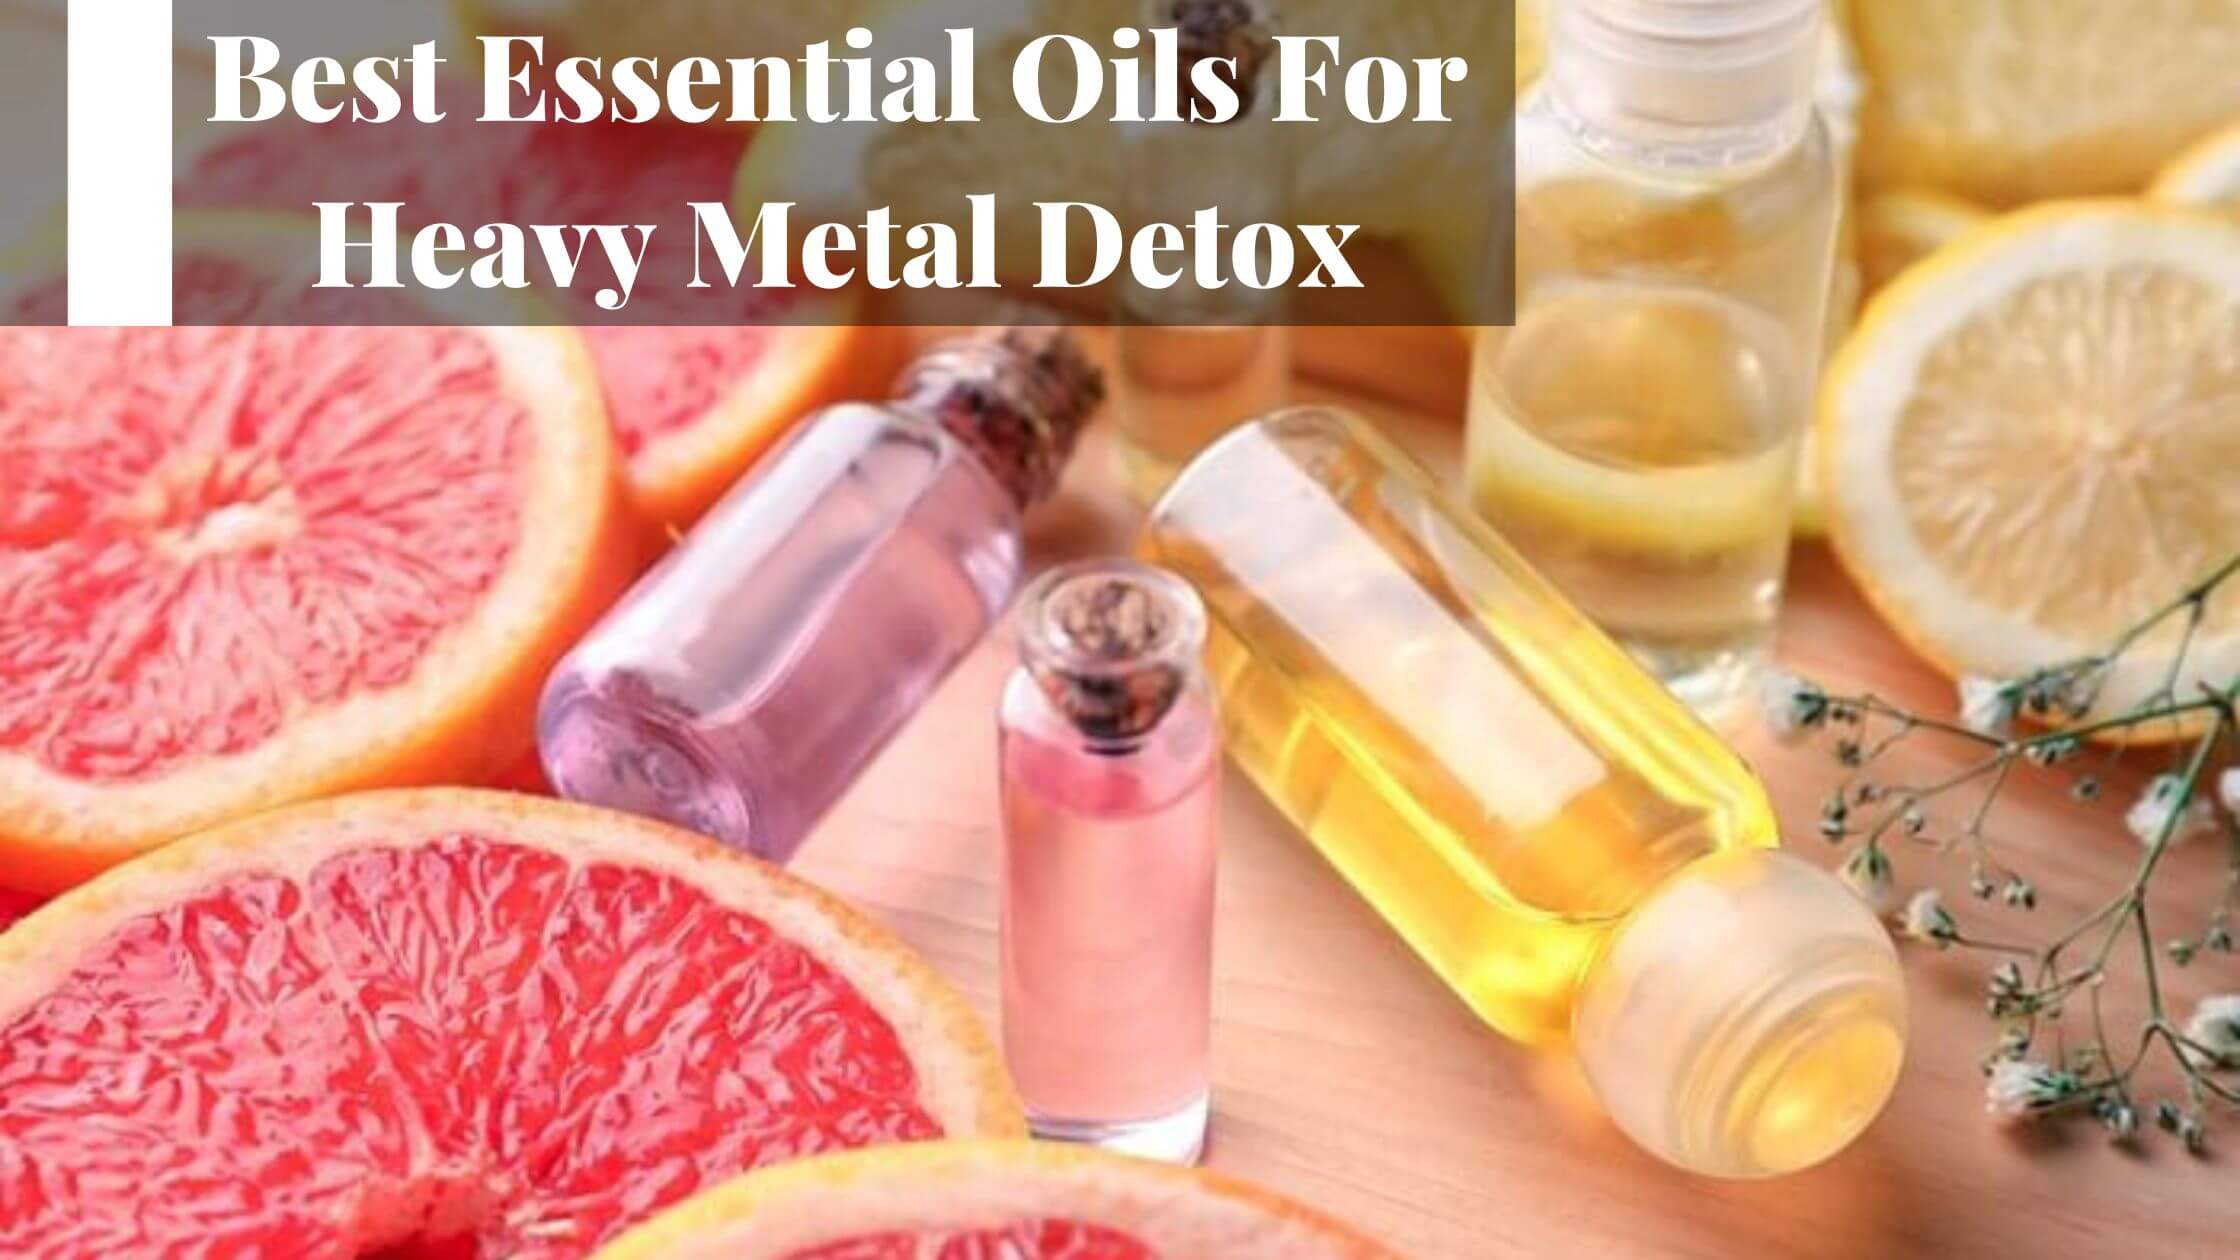 The Best Essential Oils For Heavy Metal Detox